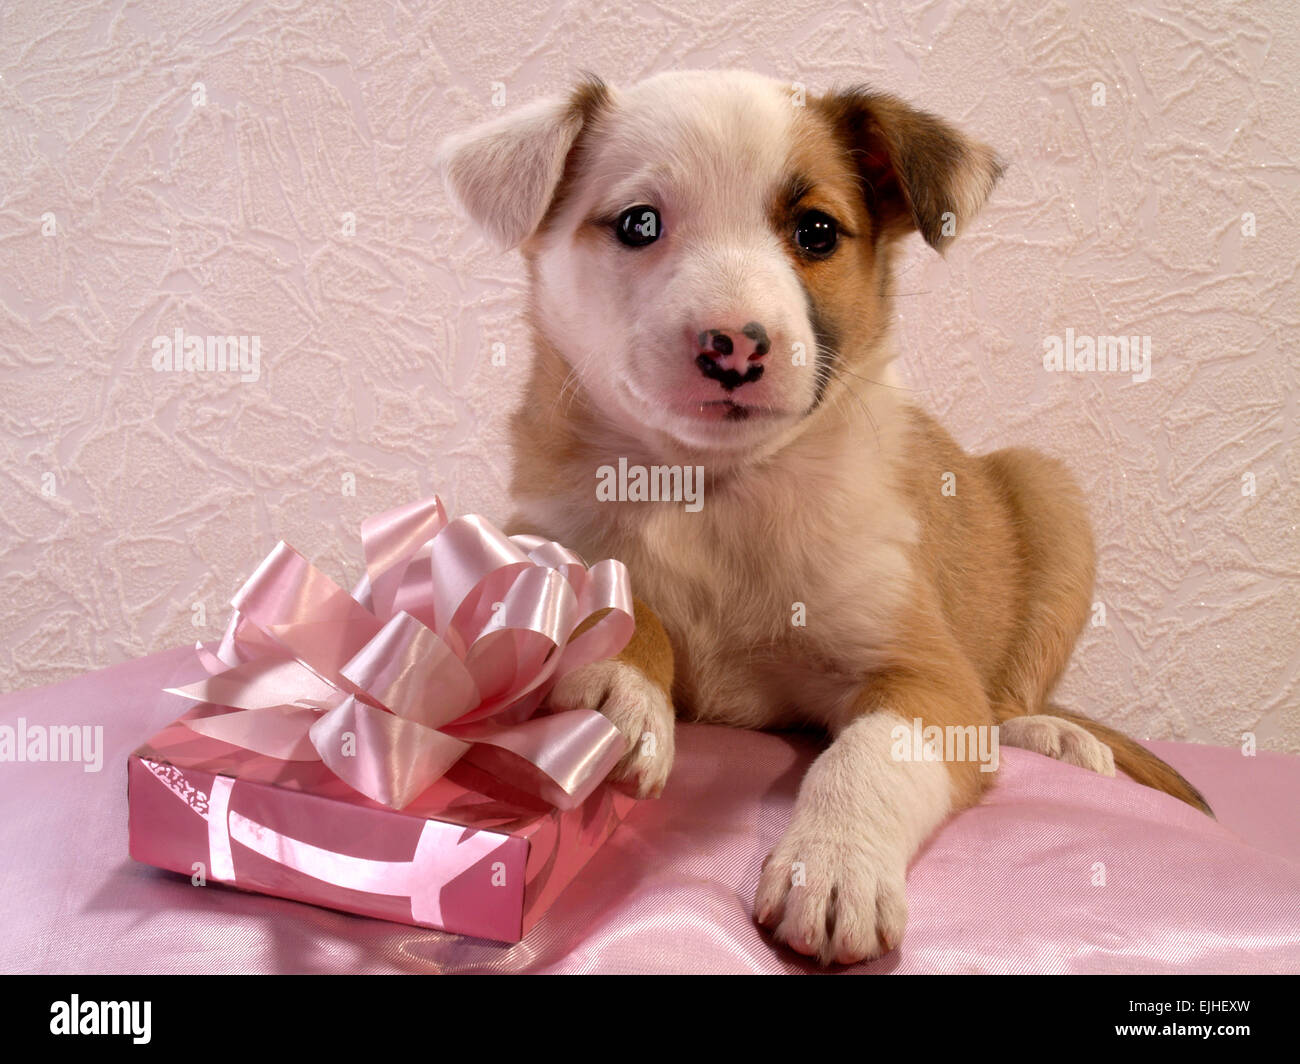 Puppy in a Gift Box with a Bow and a Rose Stock Image - Image of pedigree,  gift: 37828747